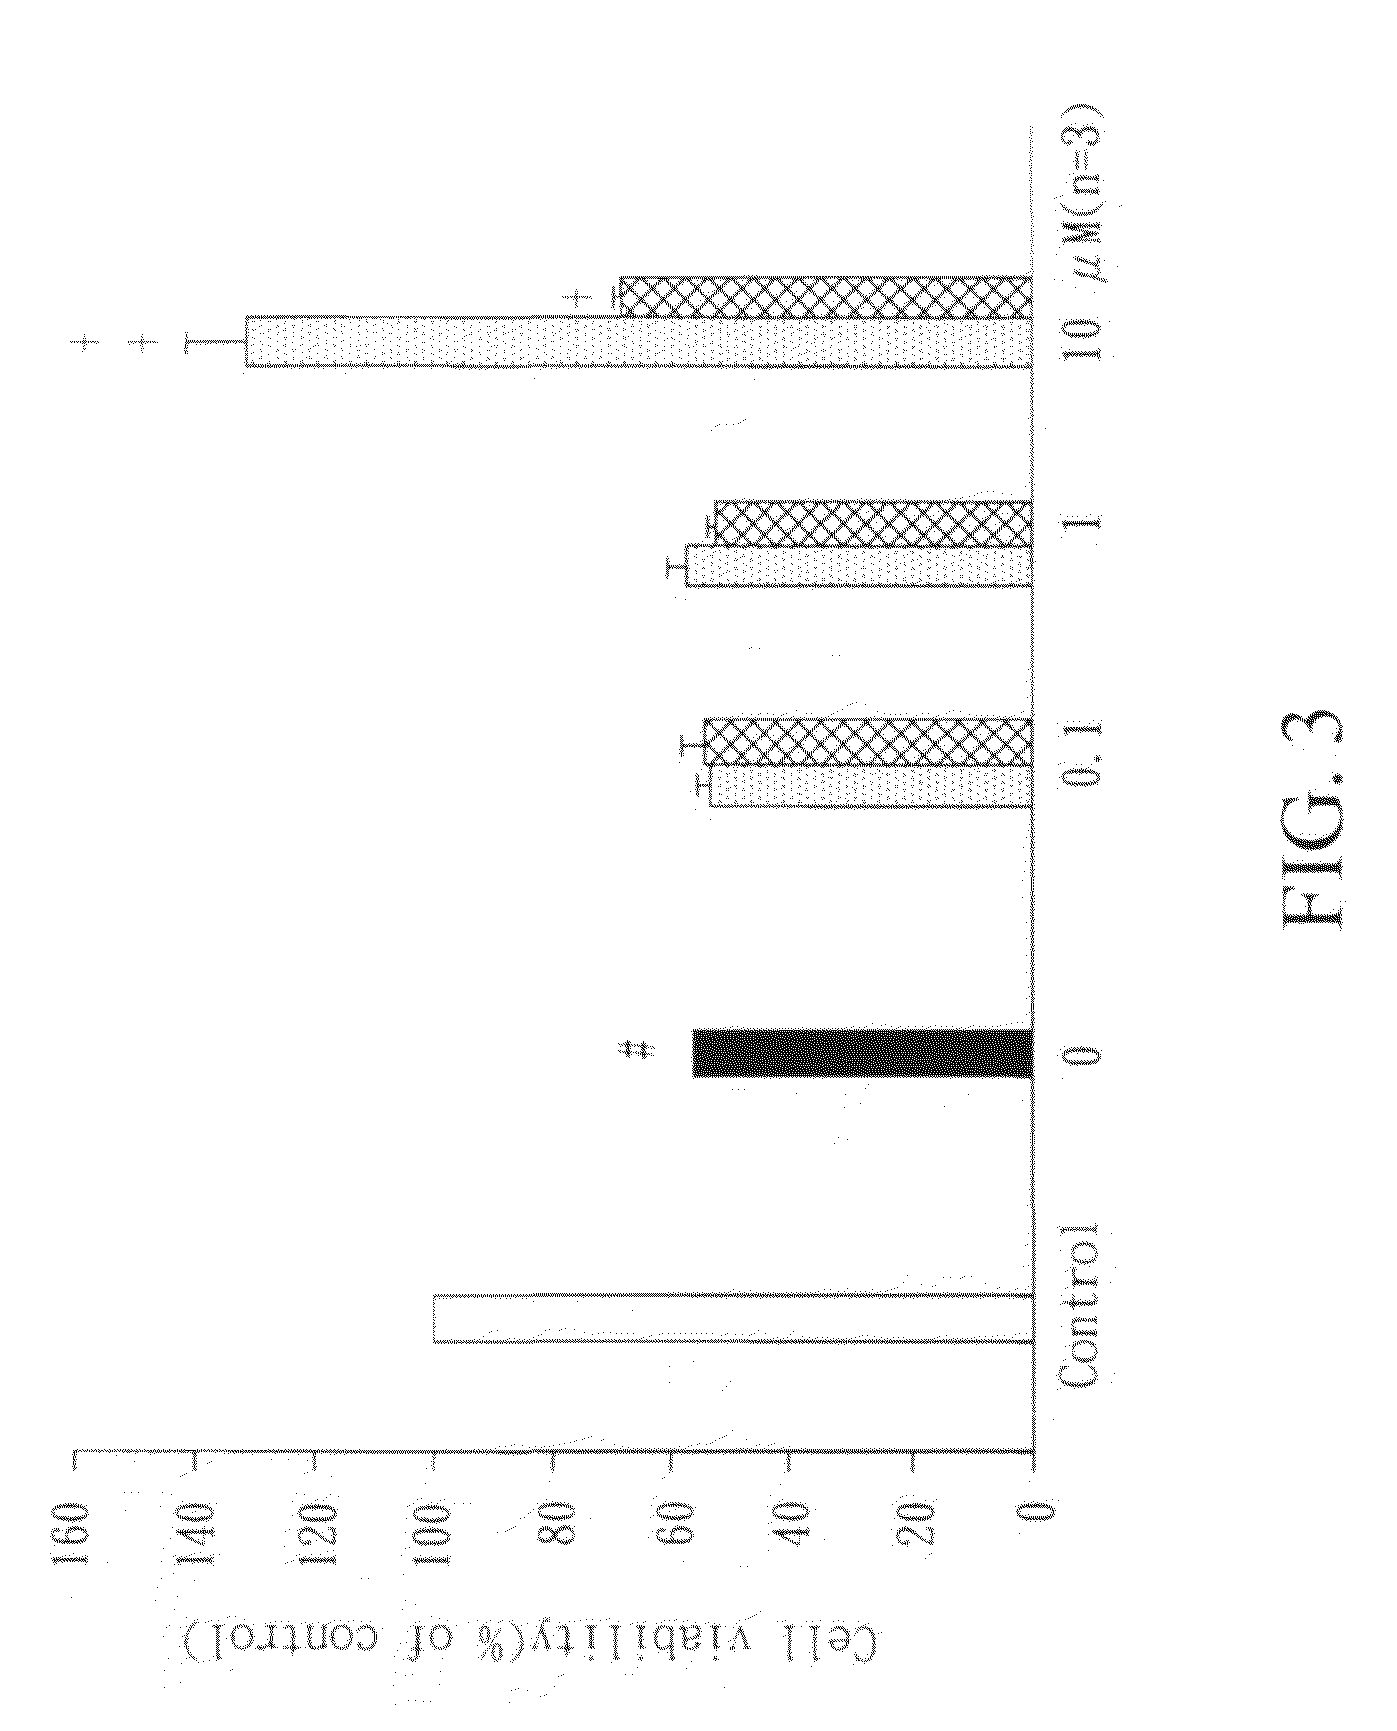 Aporphine derivatives and pharmaceutical use thereof